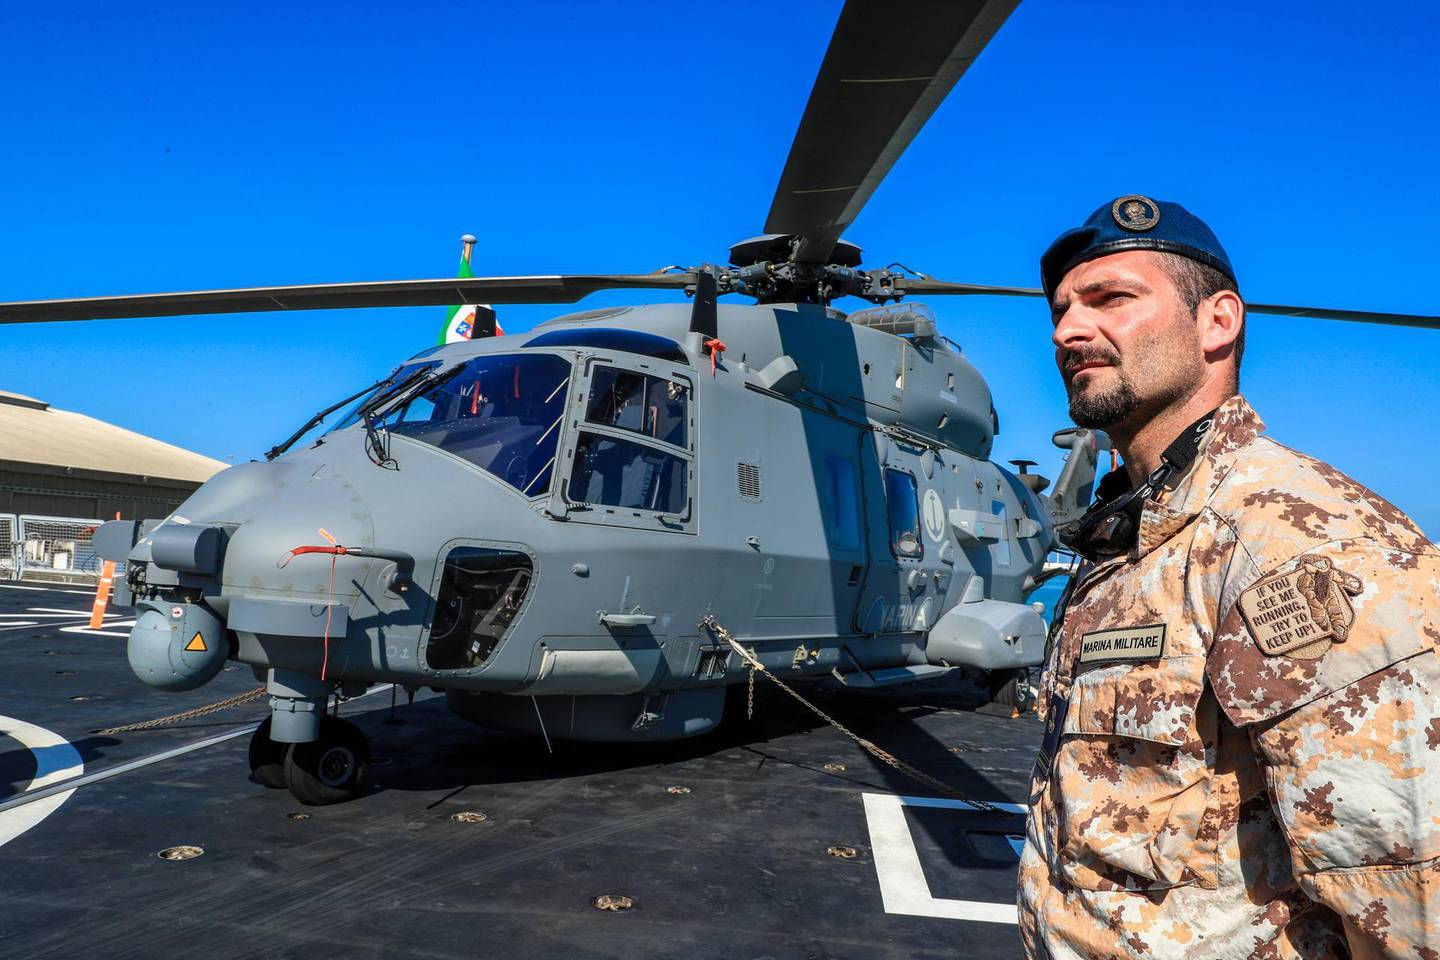 Abu Dhabi, U.A.E., February 14, 2019.  European Multi-Mission Frigate (FREMM), Carlo Margottini has docked at the Abu Dhabi Port with Commander Marco Guerriero.  --  Italian Elite Special Forces.Victor Besa/The NationalSection:  NAReporter:  Charlie Mitchell